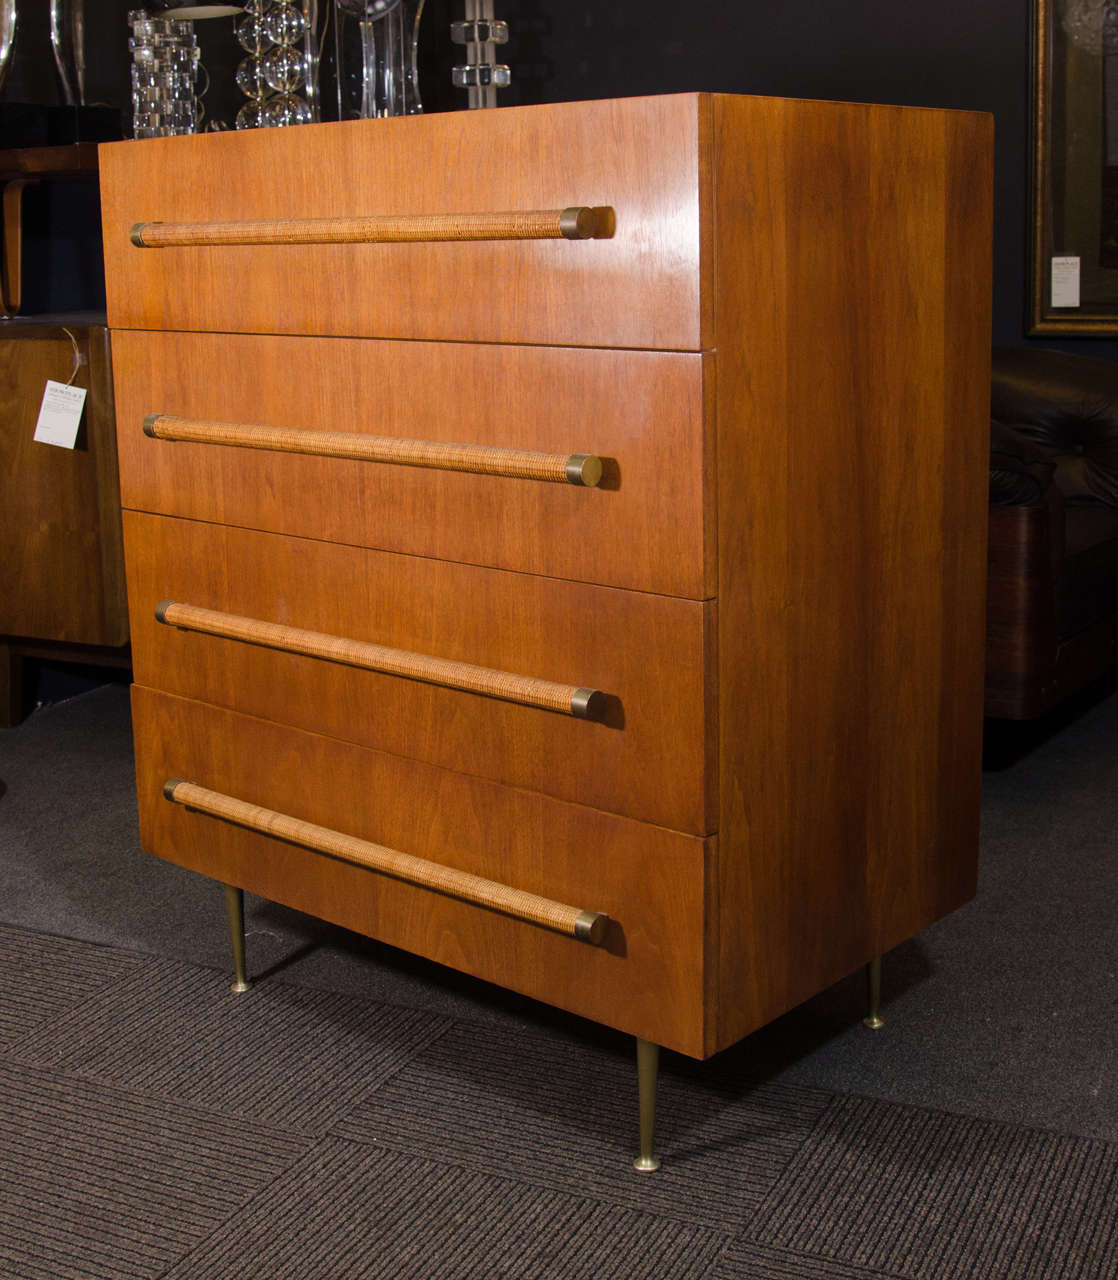 A vintage T.H. Robsjohn-Gibbings four-drawer dresser in walnut with weaved wicker covering drawer pulls, brass legs and hardware.

Reduced from: $5000